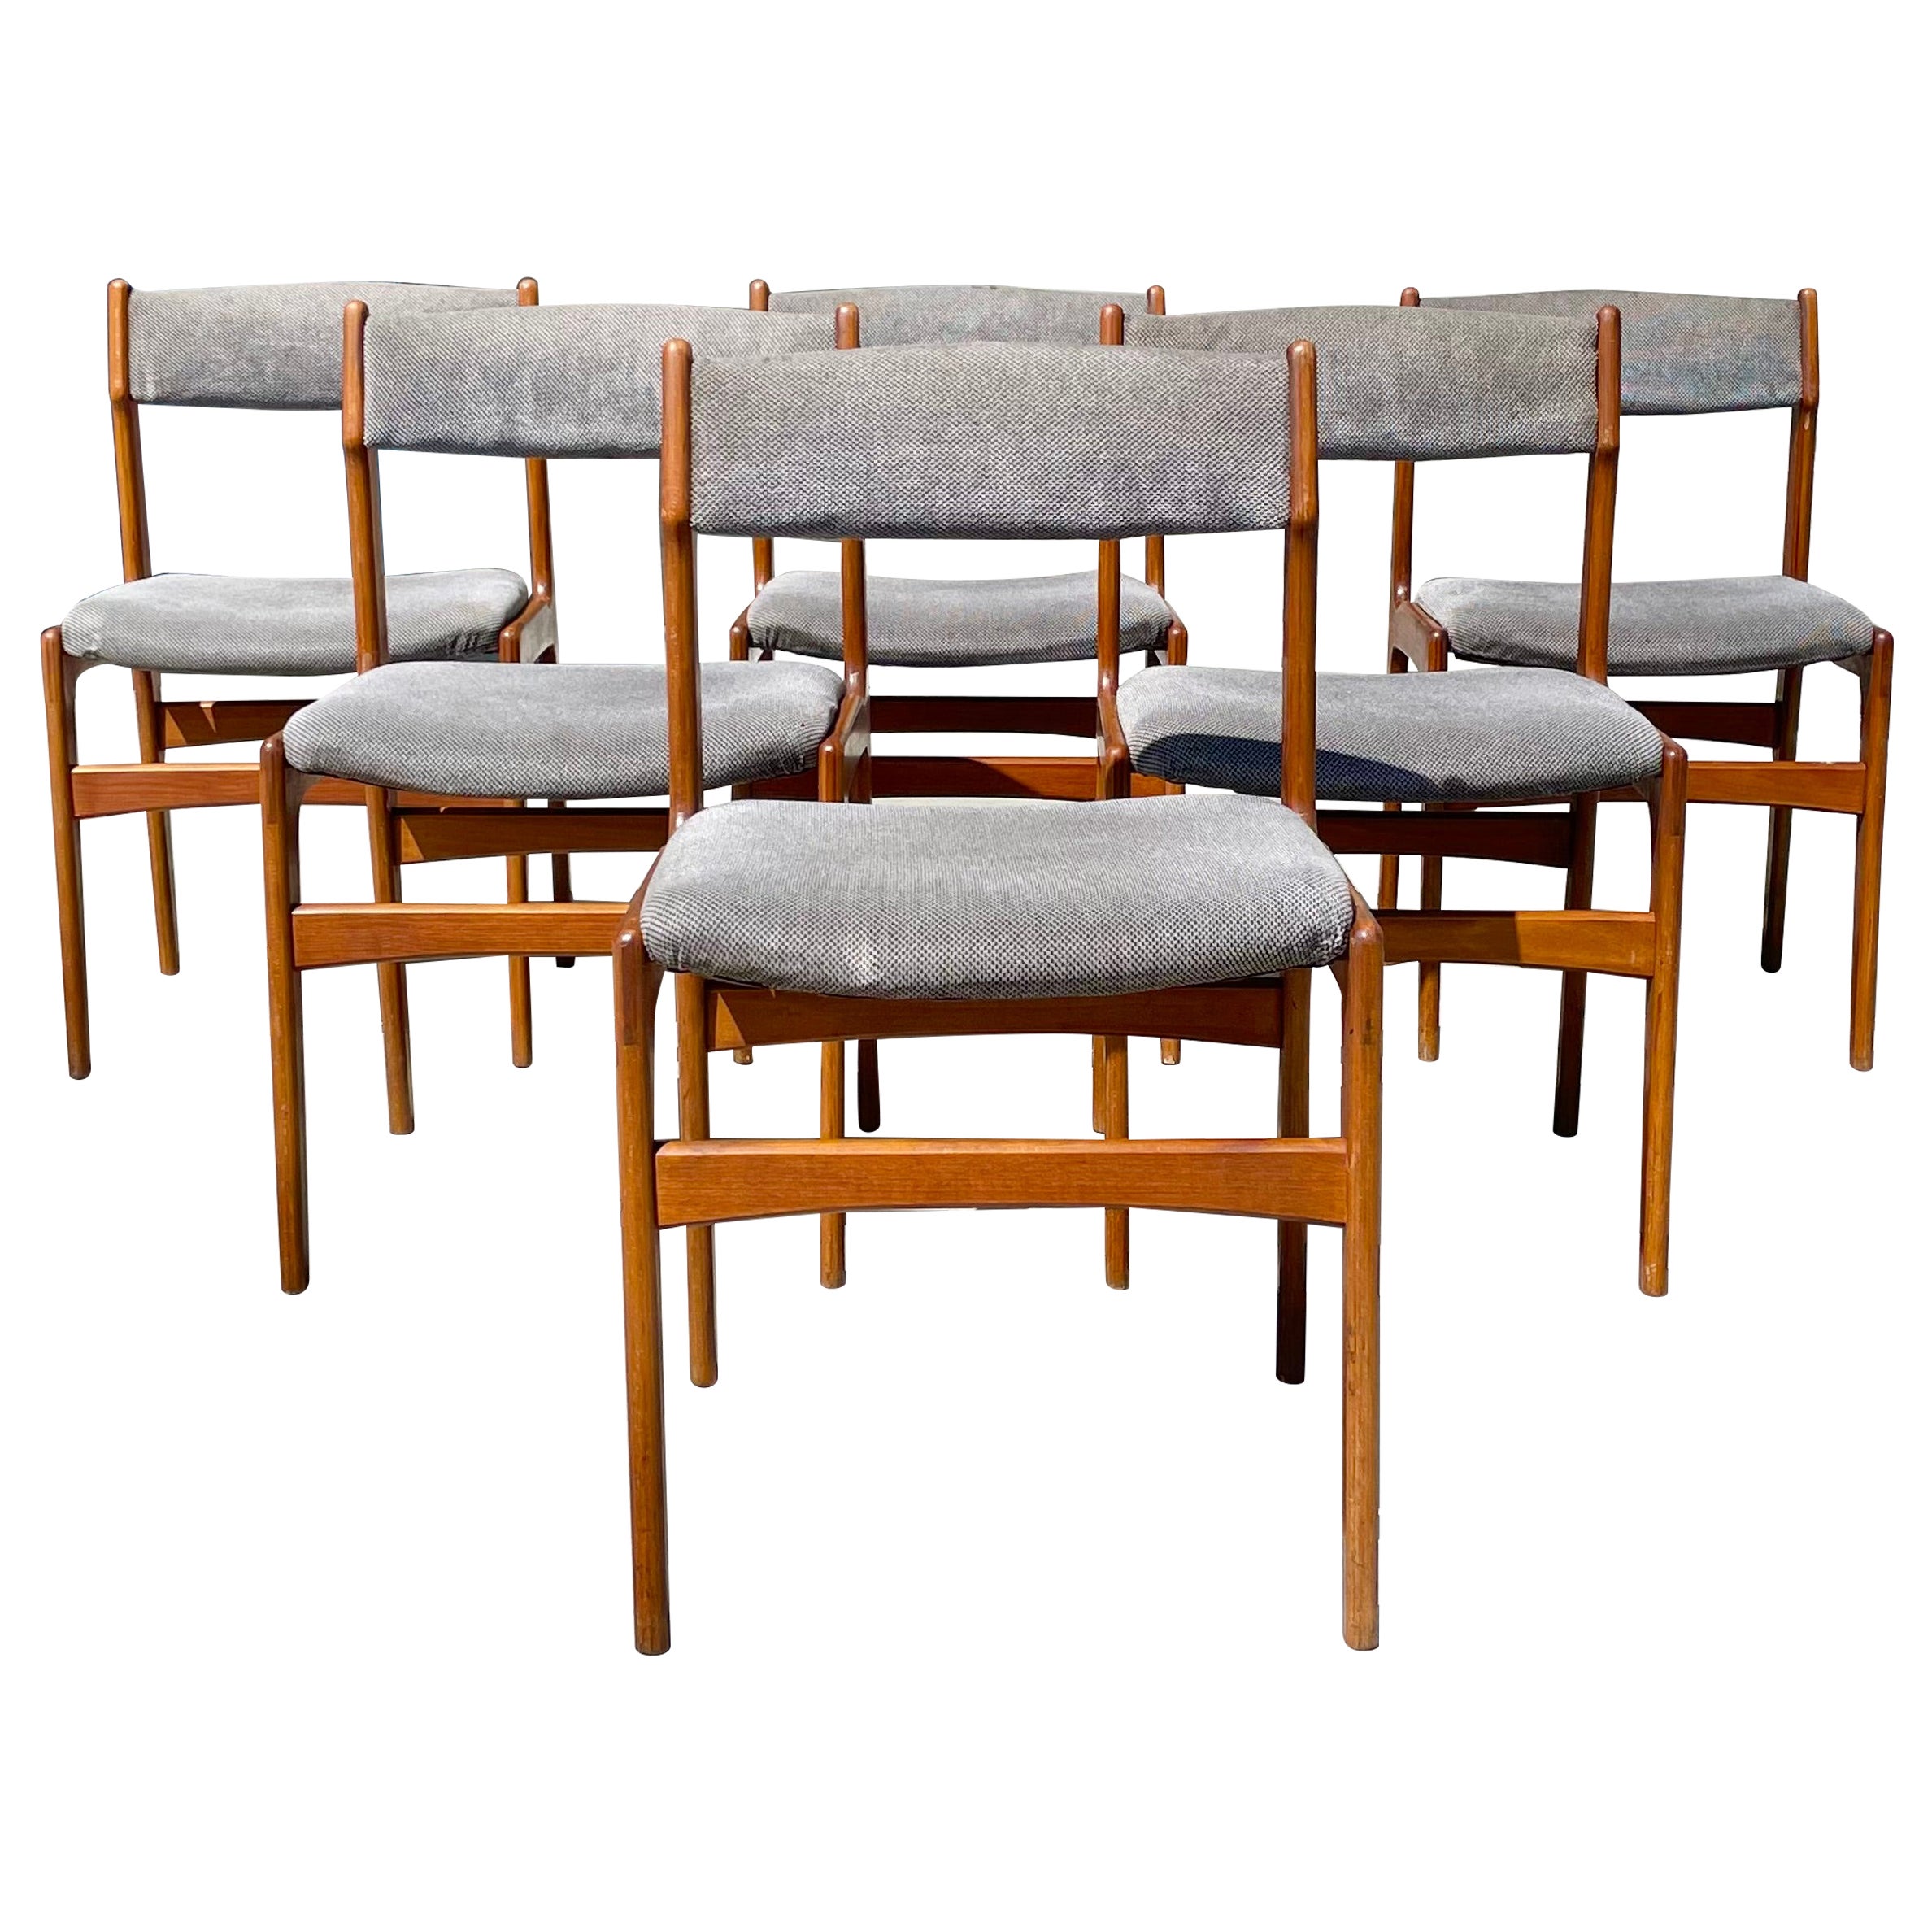 1960s Danish Modern Teak Dining Chairs - Set of 6 For Sale